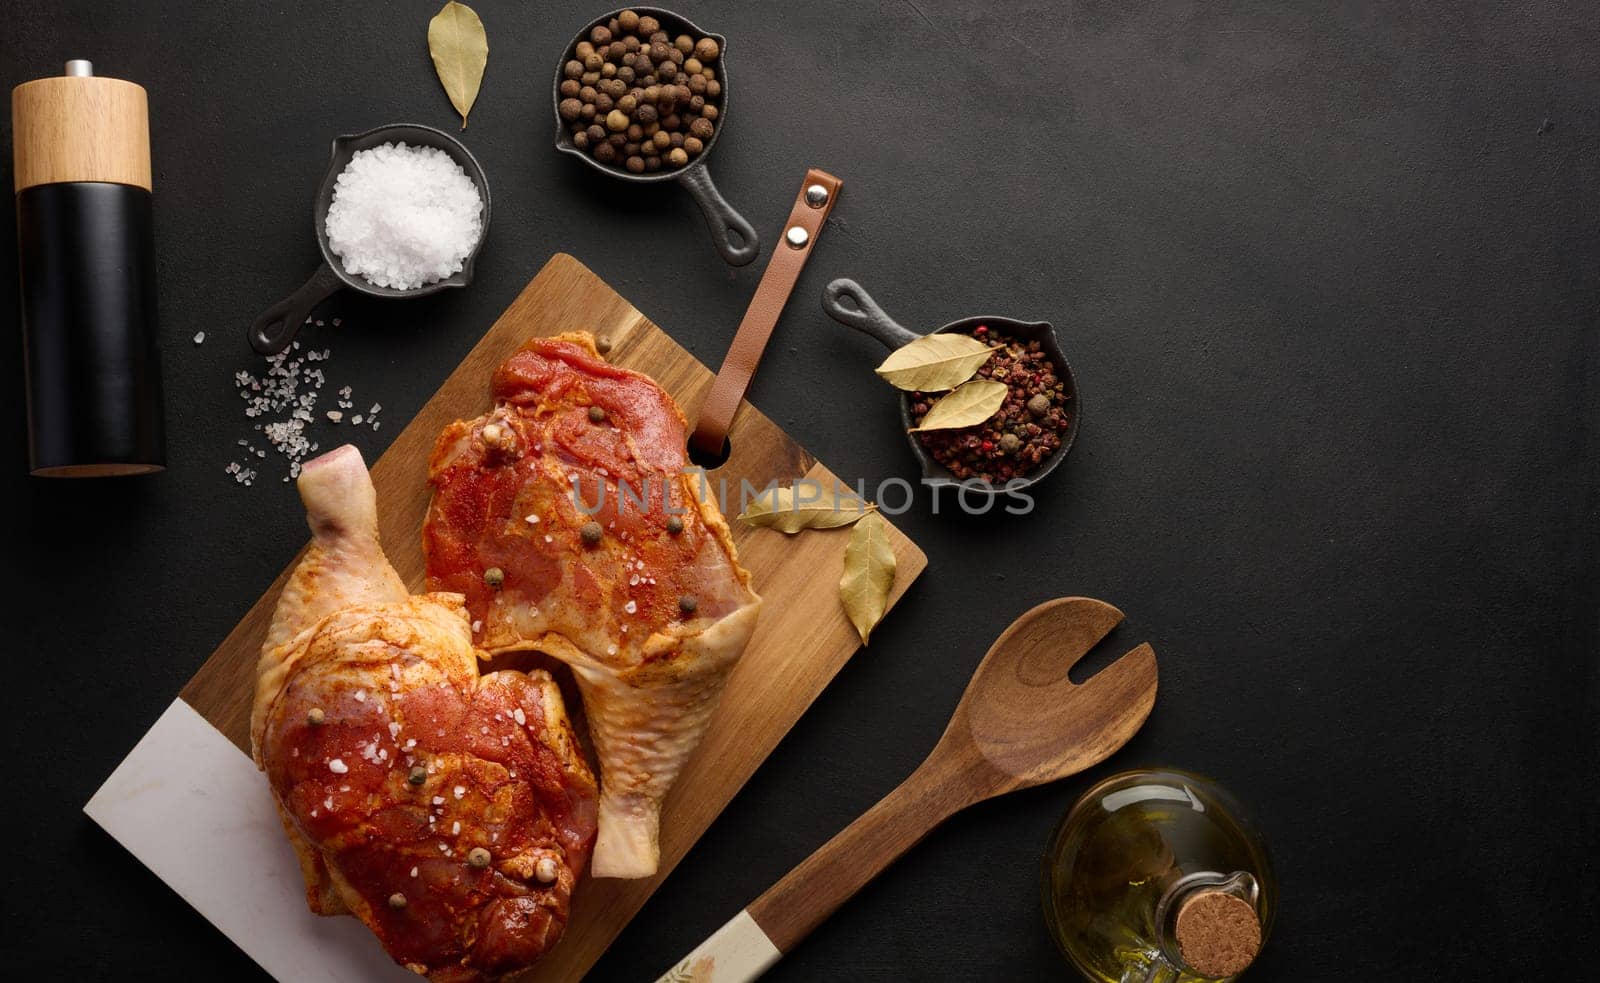 Raw chicken drumsticks seasoned on a wooden board, accompanied by salt and peppercorns, viewed from the top. Black table